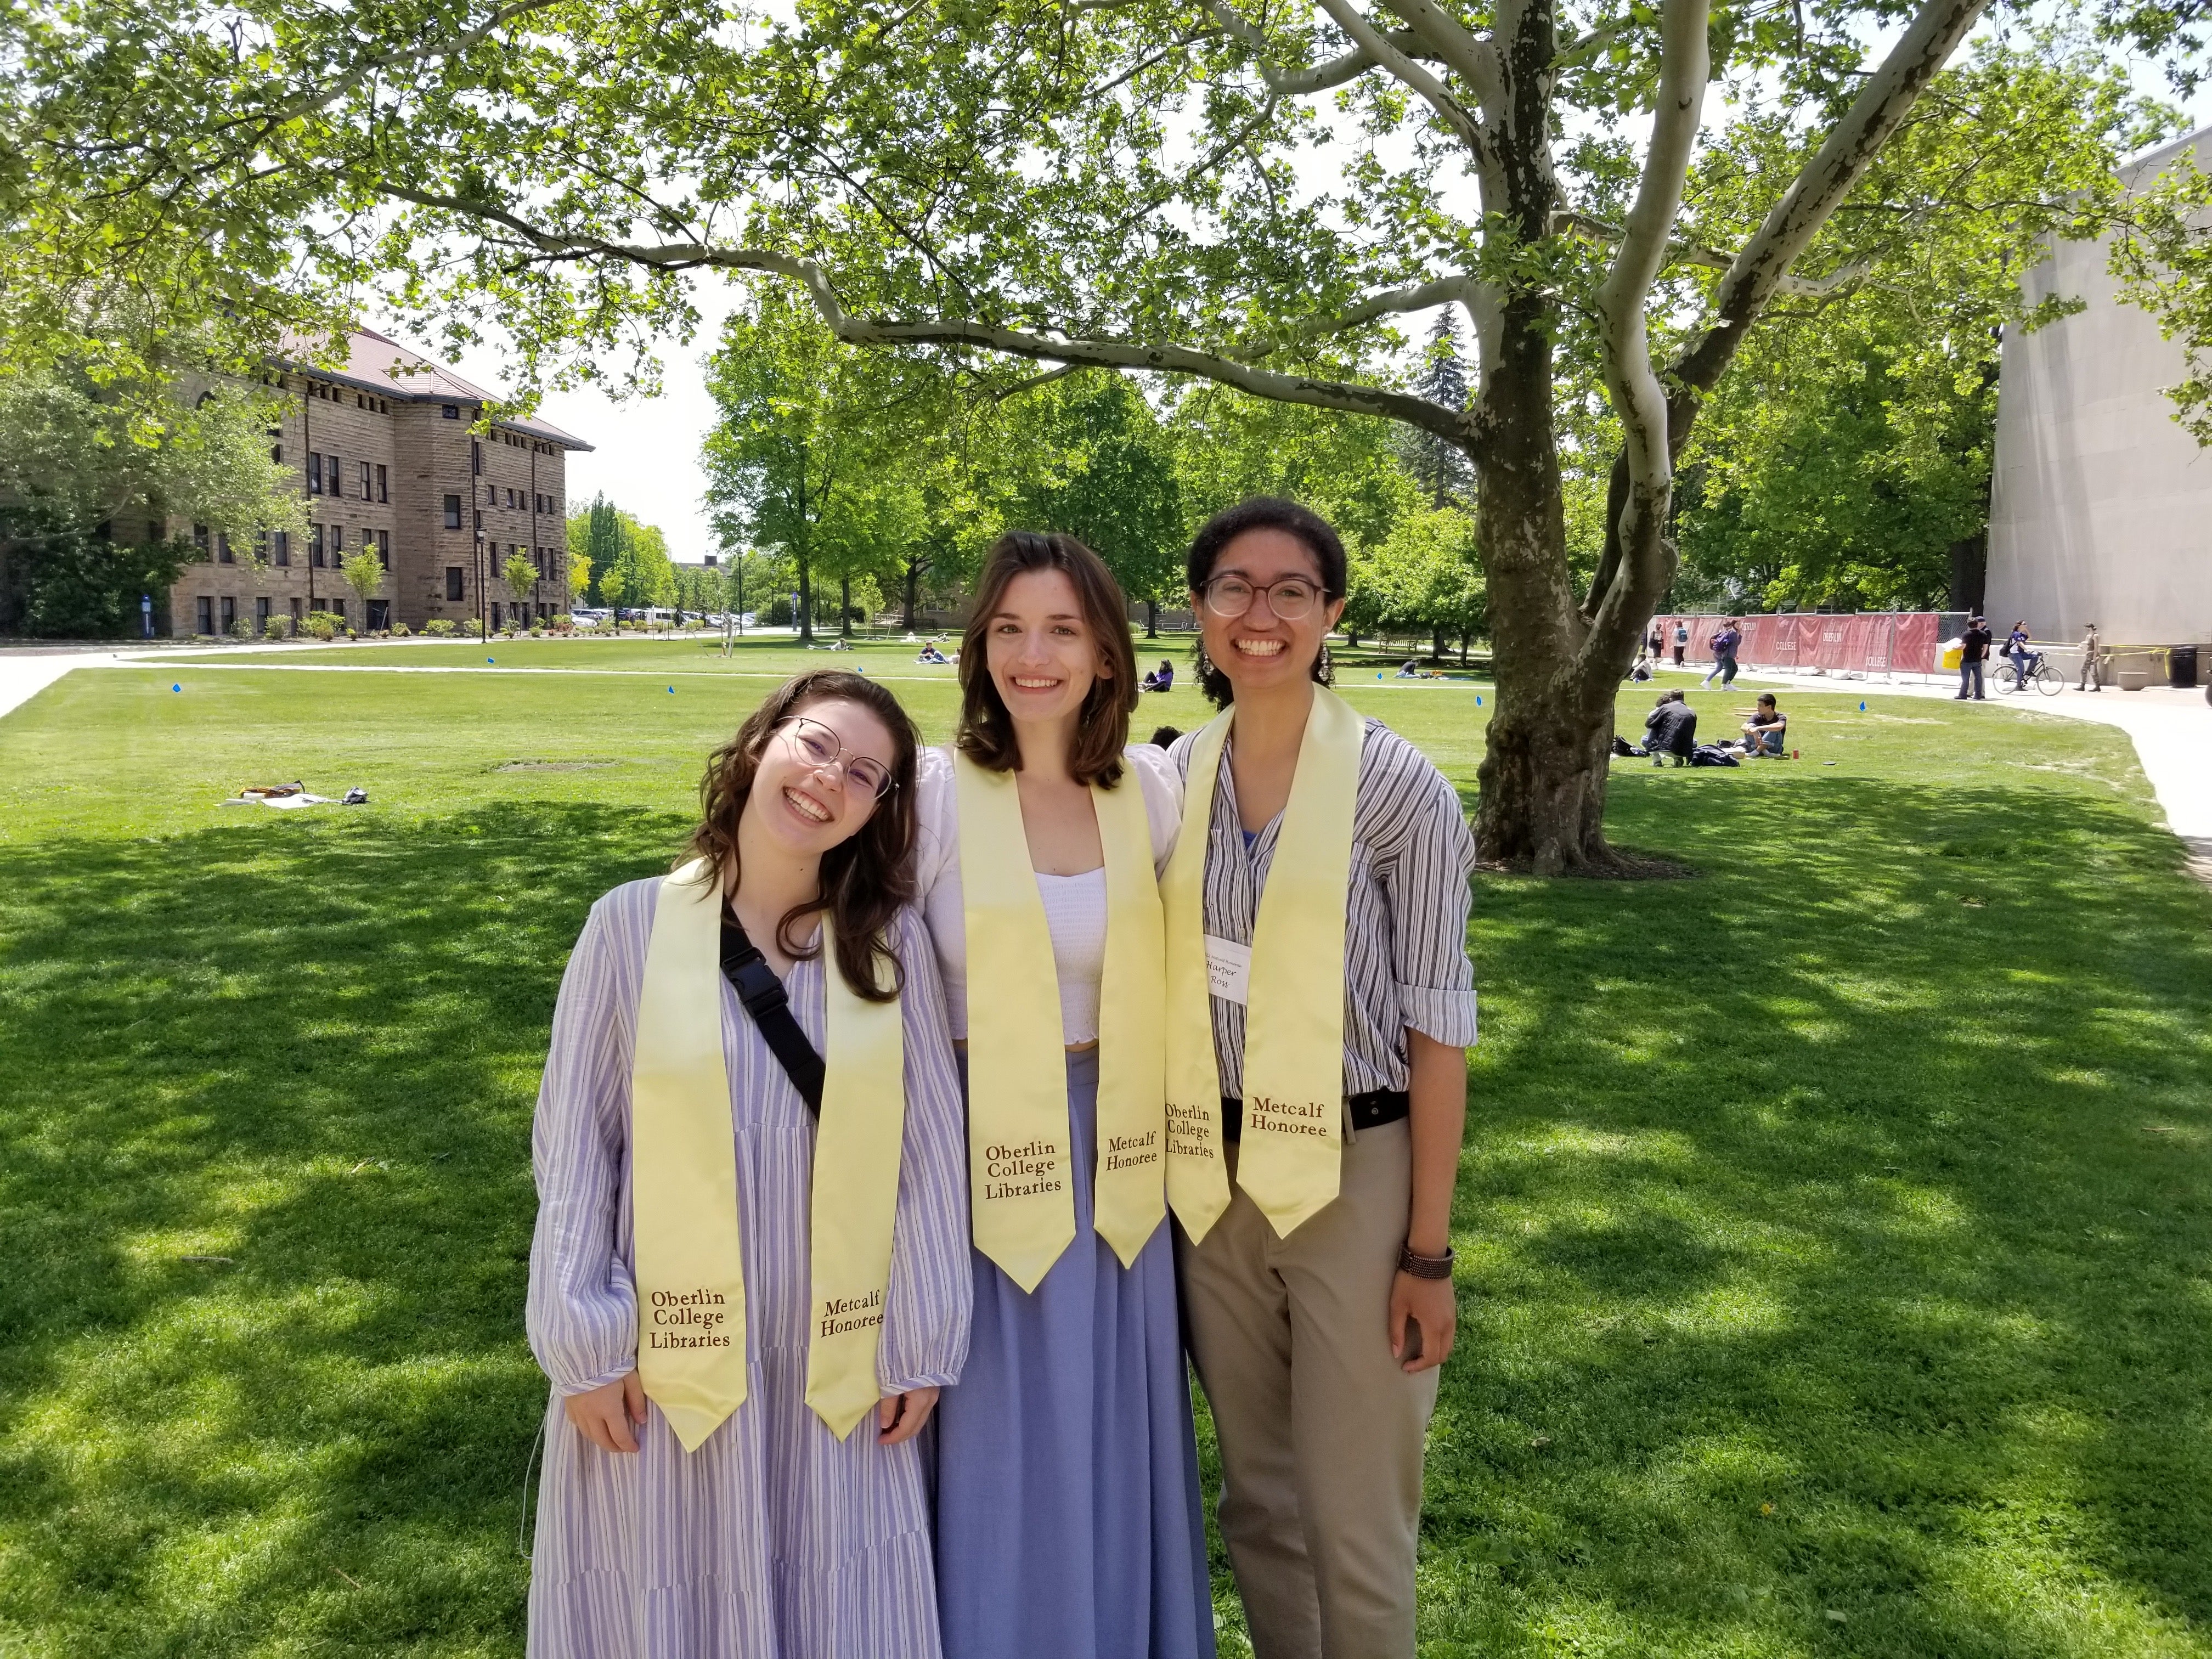 Megan stands between two other people in the middle of Wilder Bowl on a sunny day. All three individuals are wearing gold sashes around their shoulders that read "Oberlin College Libraries" on one side and "Metcalf Honoree" on the other. They are smiling and having a great time!!